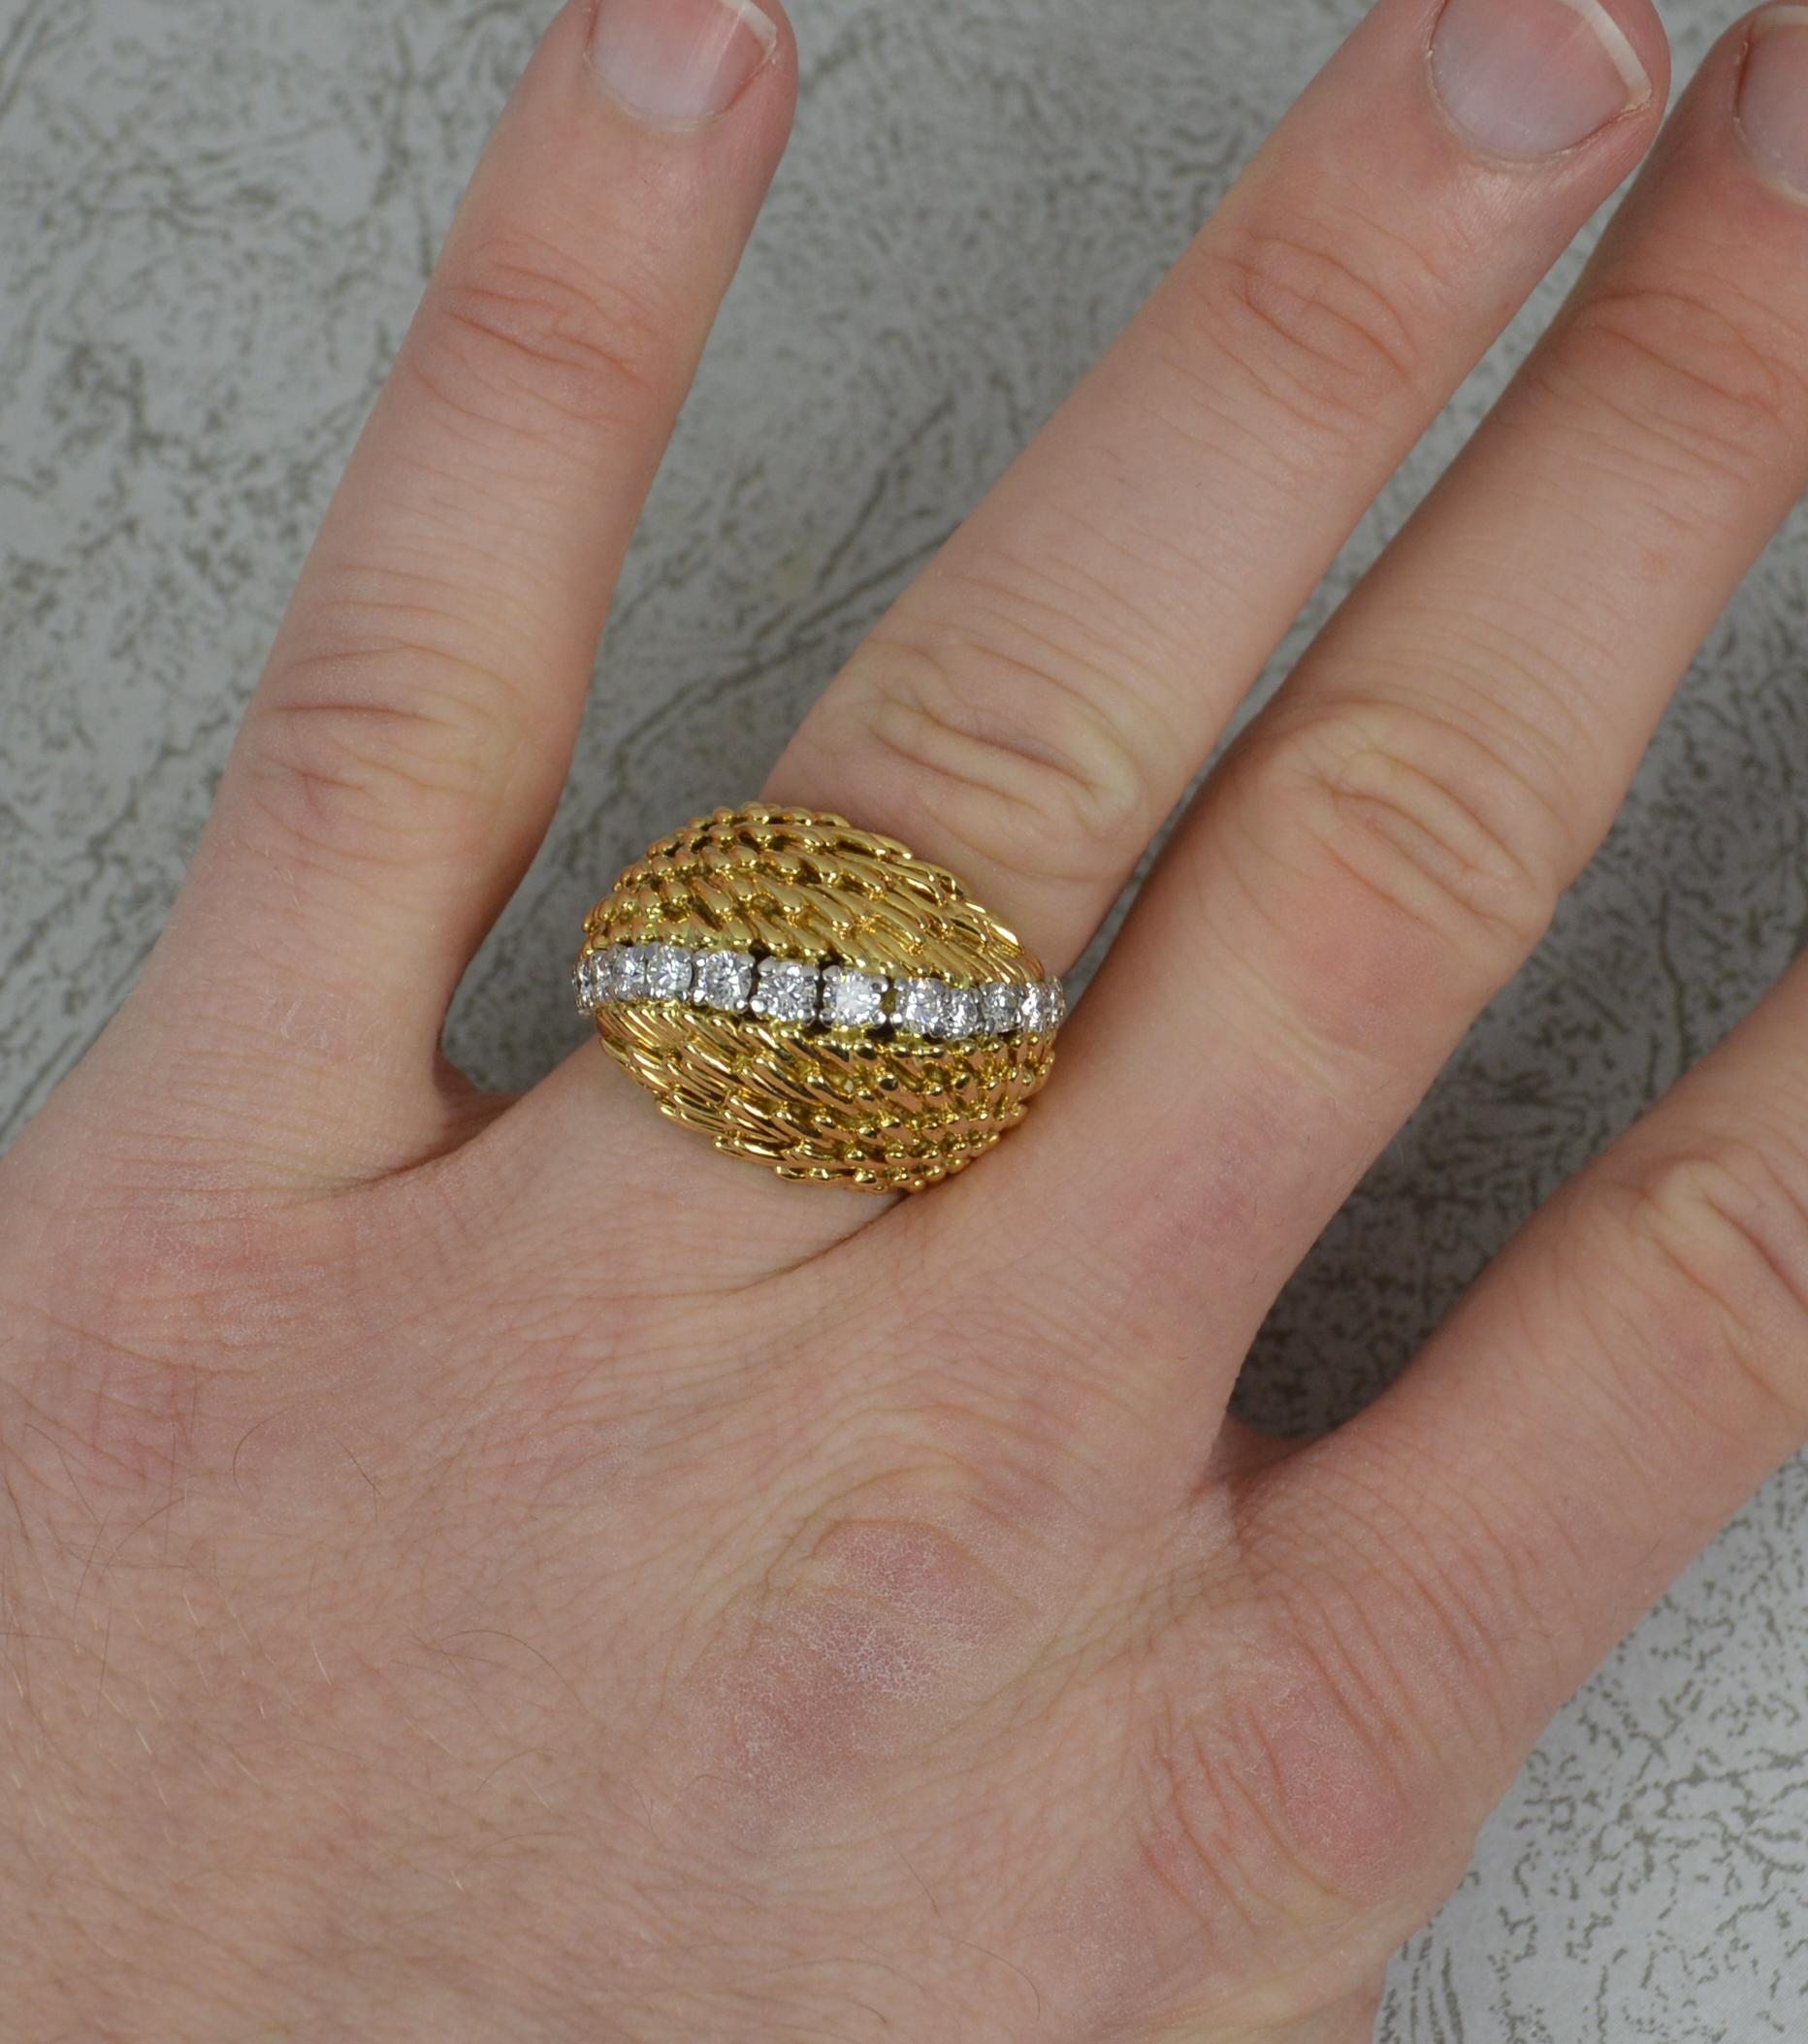 A stunning Kutchinsky ring.
Solid 18 carat yellow gold ring with white gold claw setting for the diamonds.
Designed with fifteen natural, round brilliat cut, diamonds set onto a diagonal. Just under 1 carat total. Vs clarity, G-H colour.
The heavy